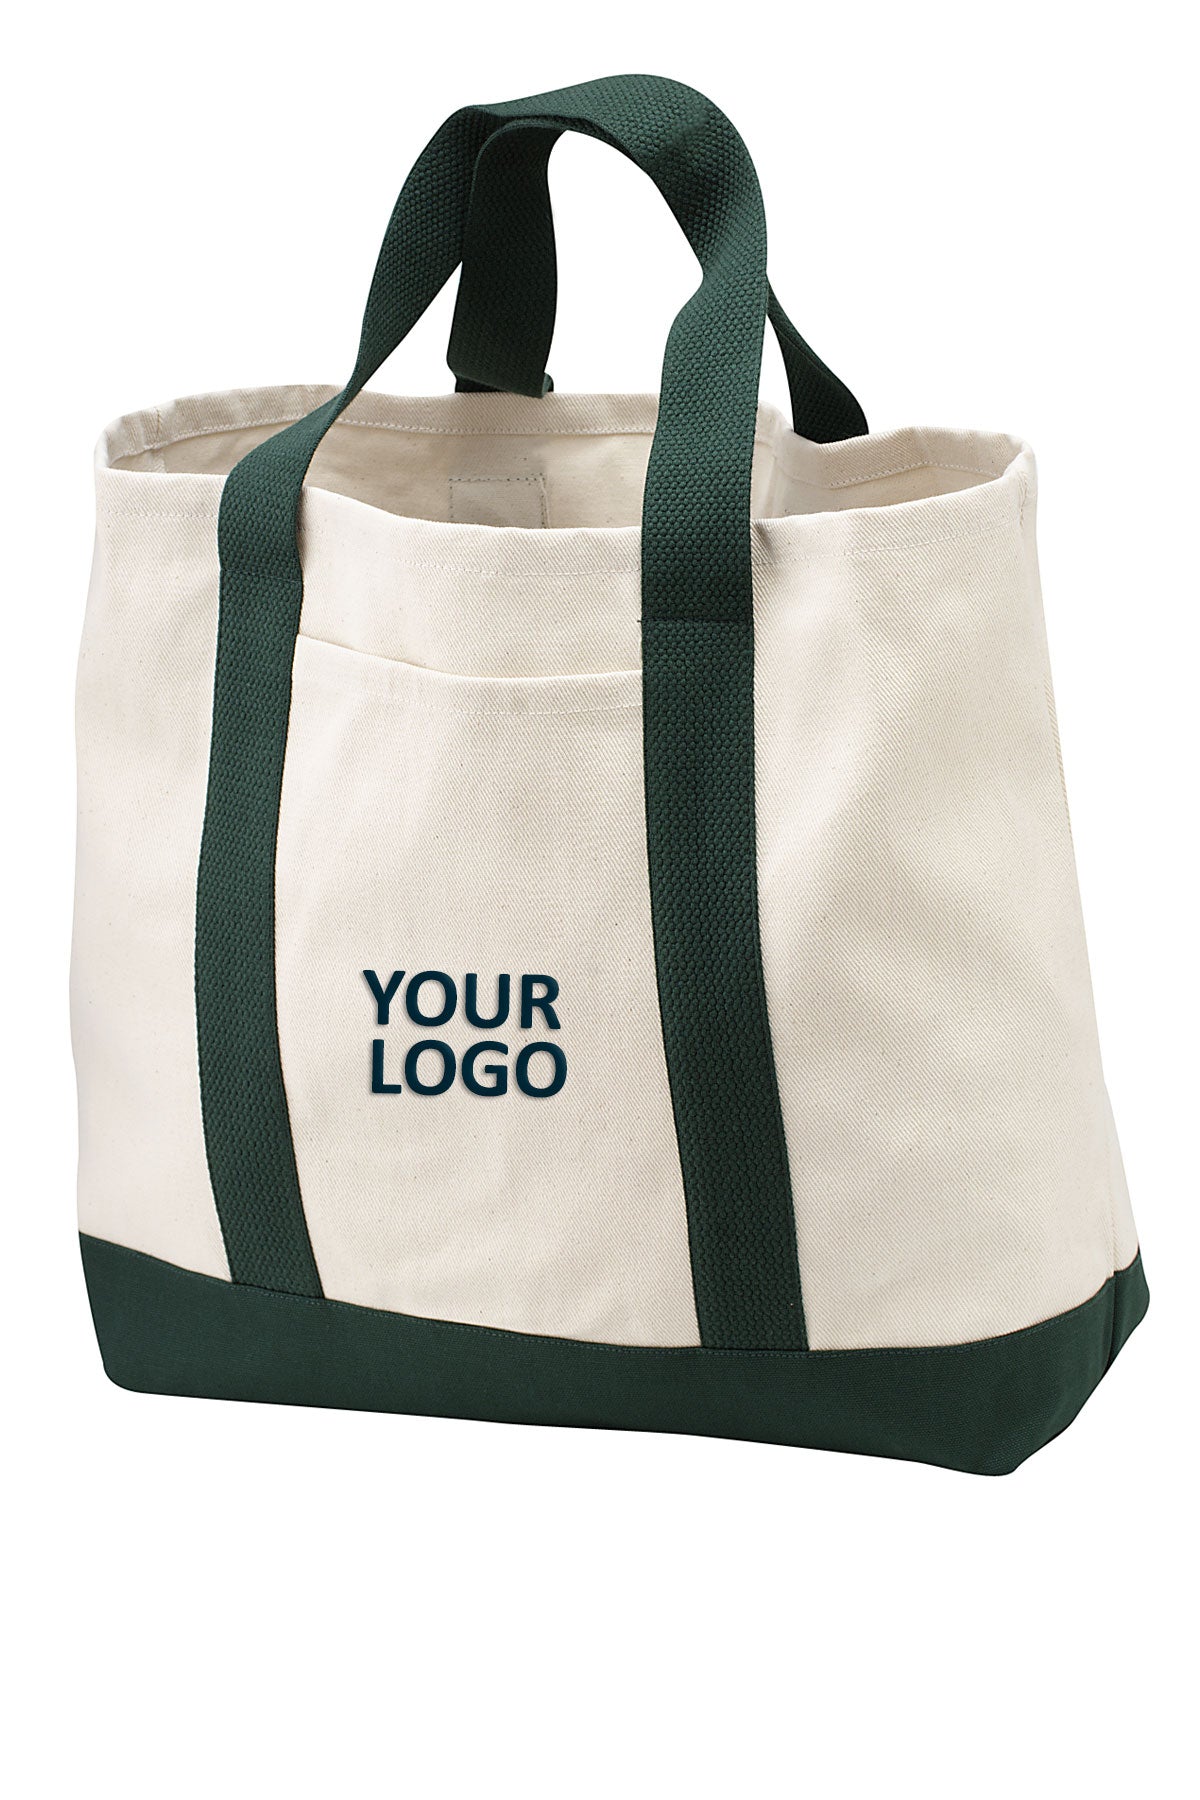 Port Authority - Two-Tone Shopping Tote